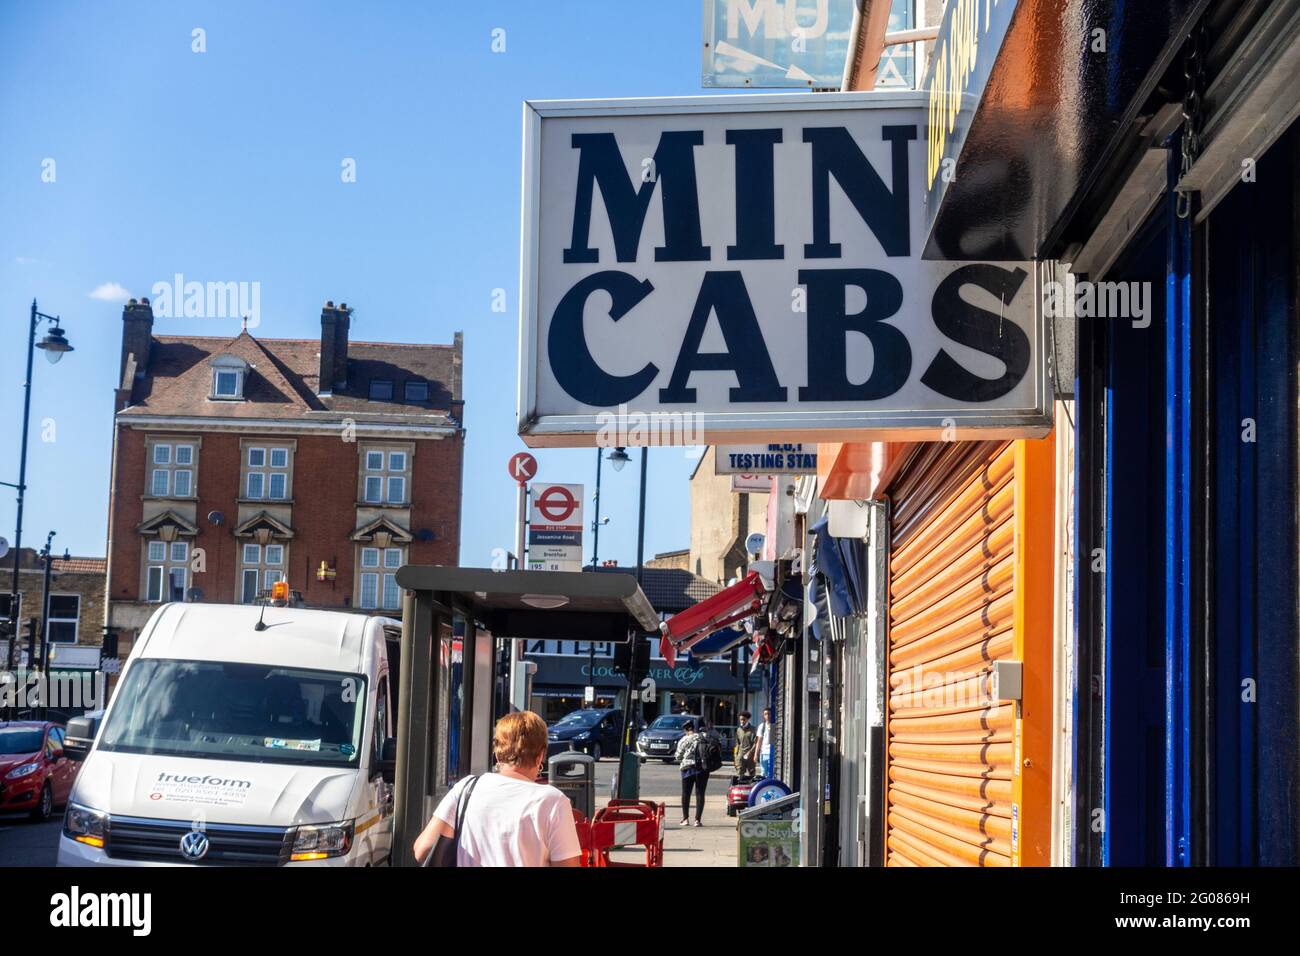 A 'Mini Cabs' sign attached to the side of a mini cab form office in Hanwell, London, UK. Stock Photo